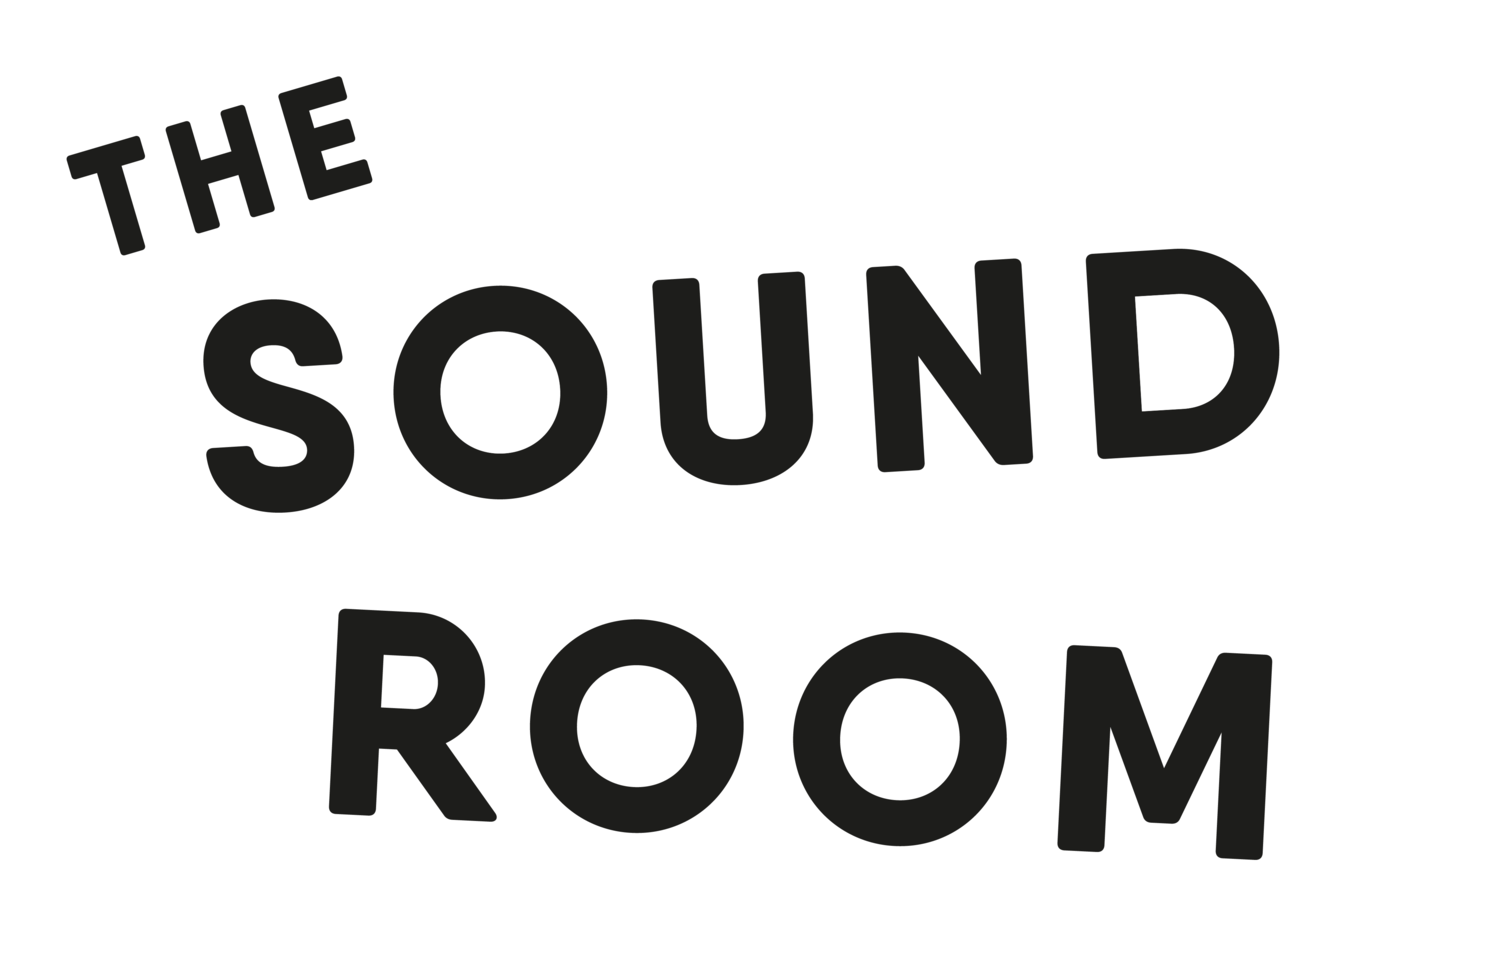 The Soundroom